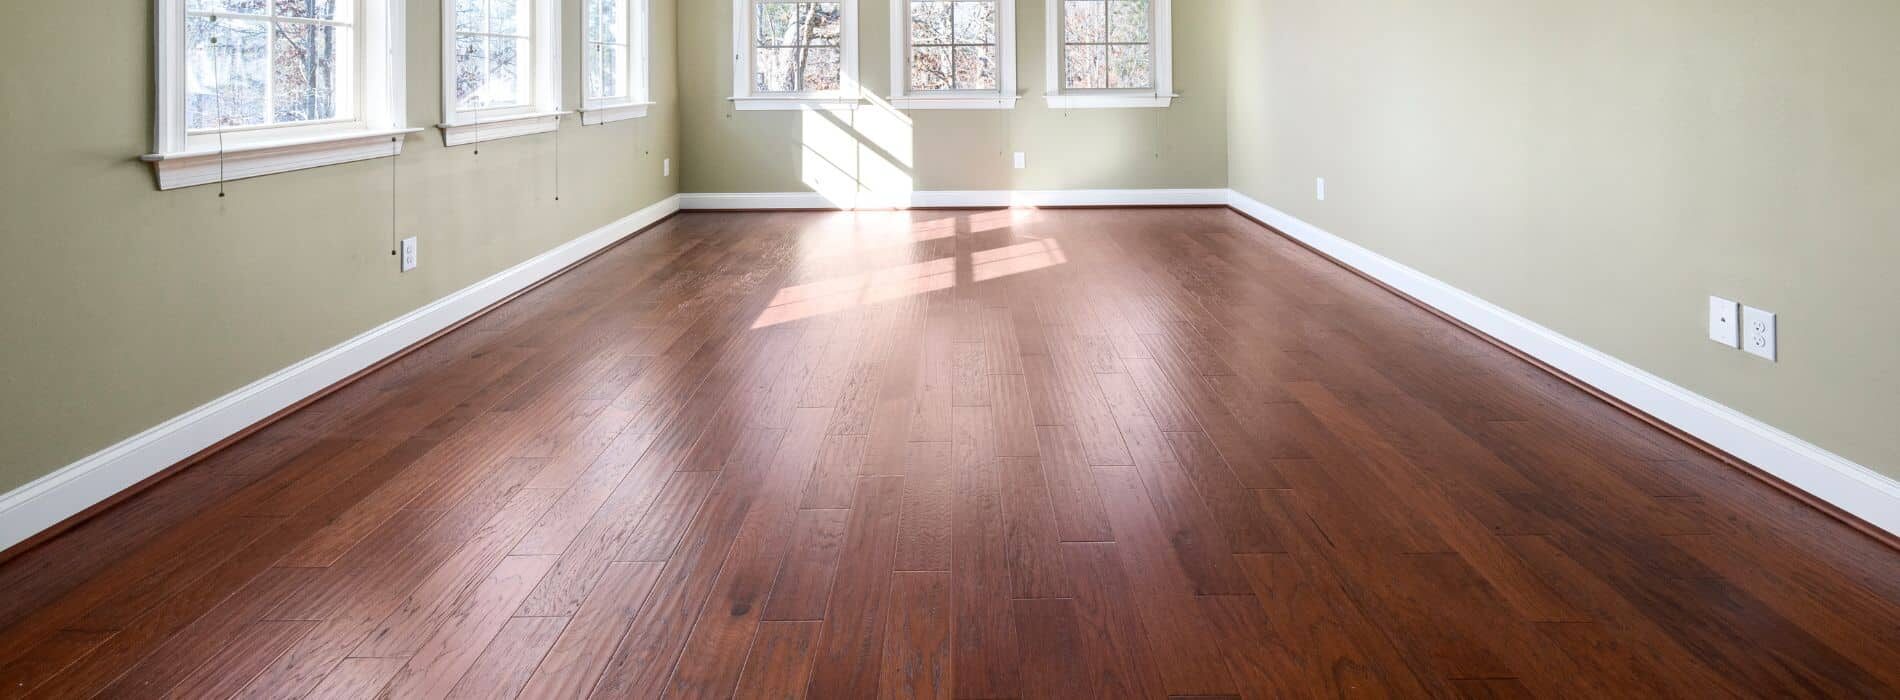 Impeccable hardwood floor restoration in World's End, SW10. Mr Sander® utilized Bona 2.5K Frost whitewashing and Traffic HD 20% sheen matte lacquer to revitalize this 5-year-old floor. With exceptional durability and breathtaking aesthetics, this finish ensures enduring charm.